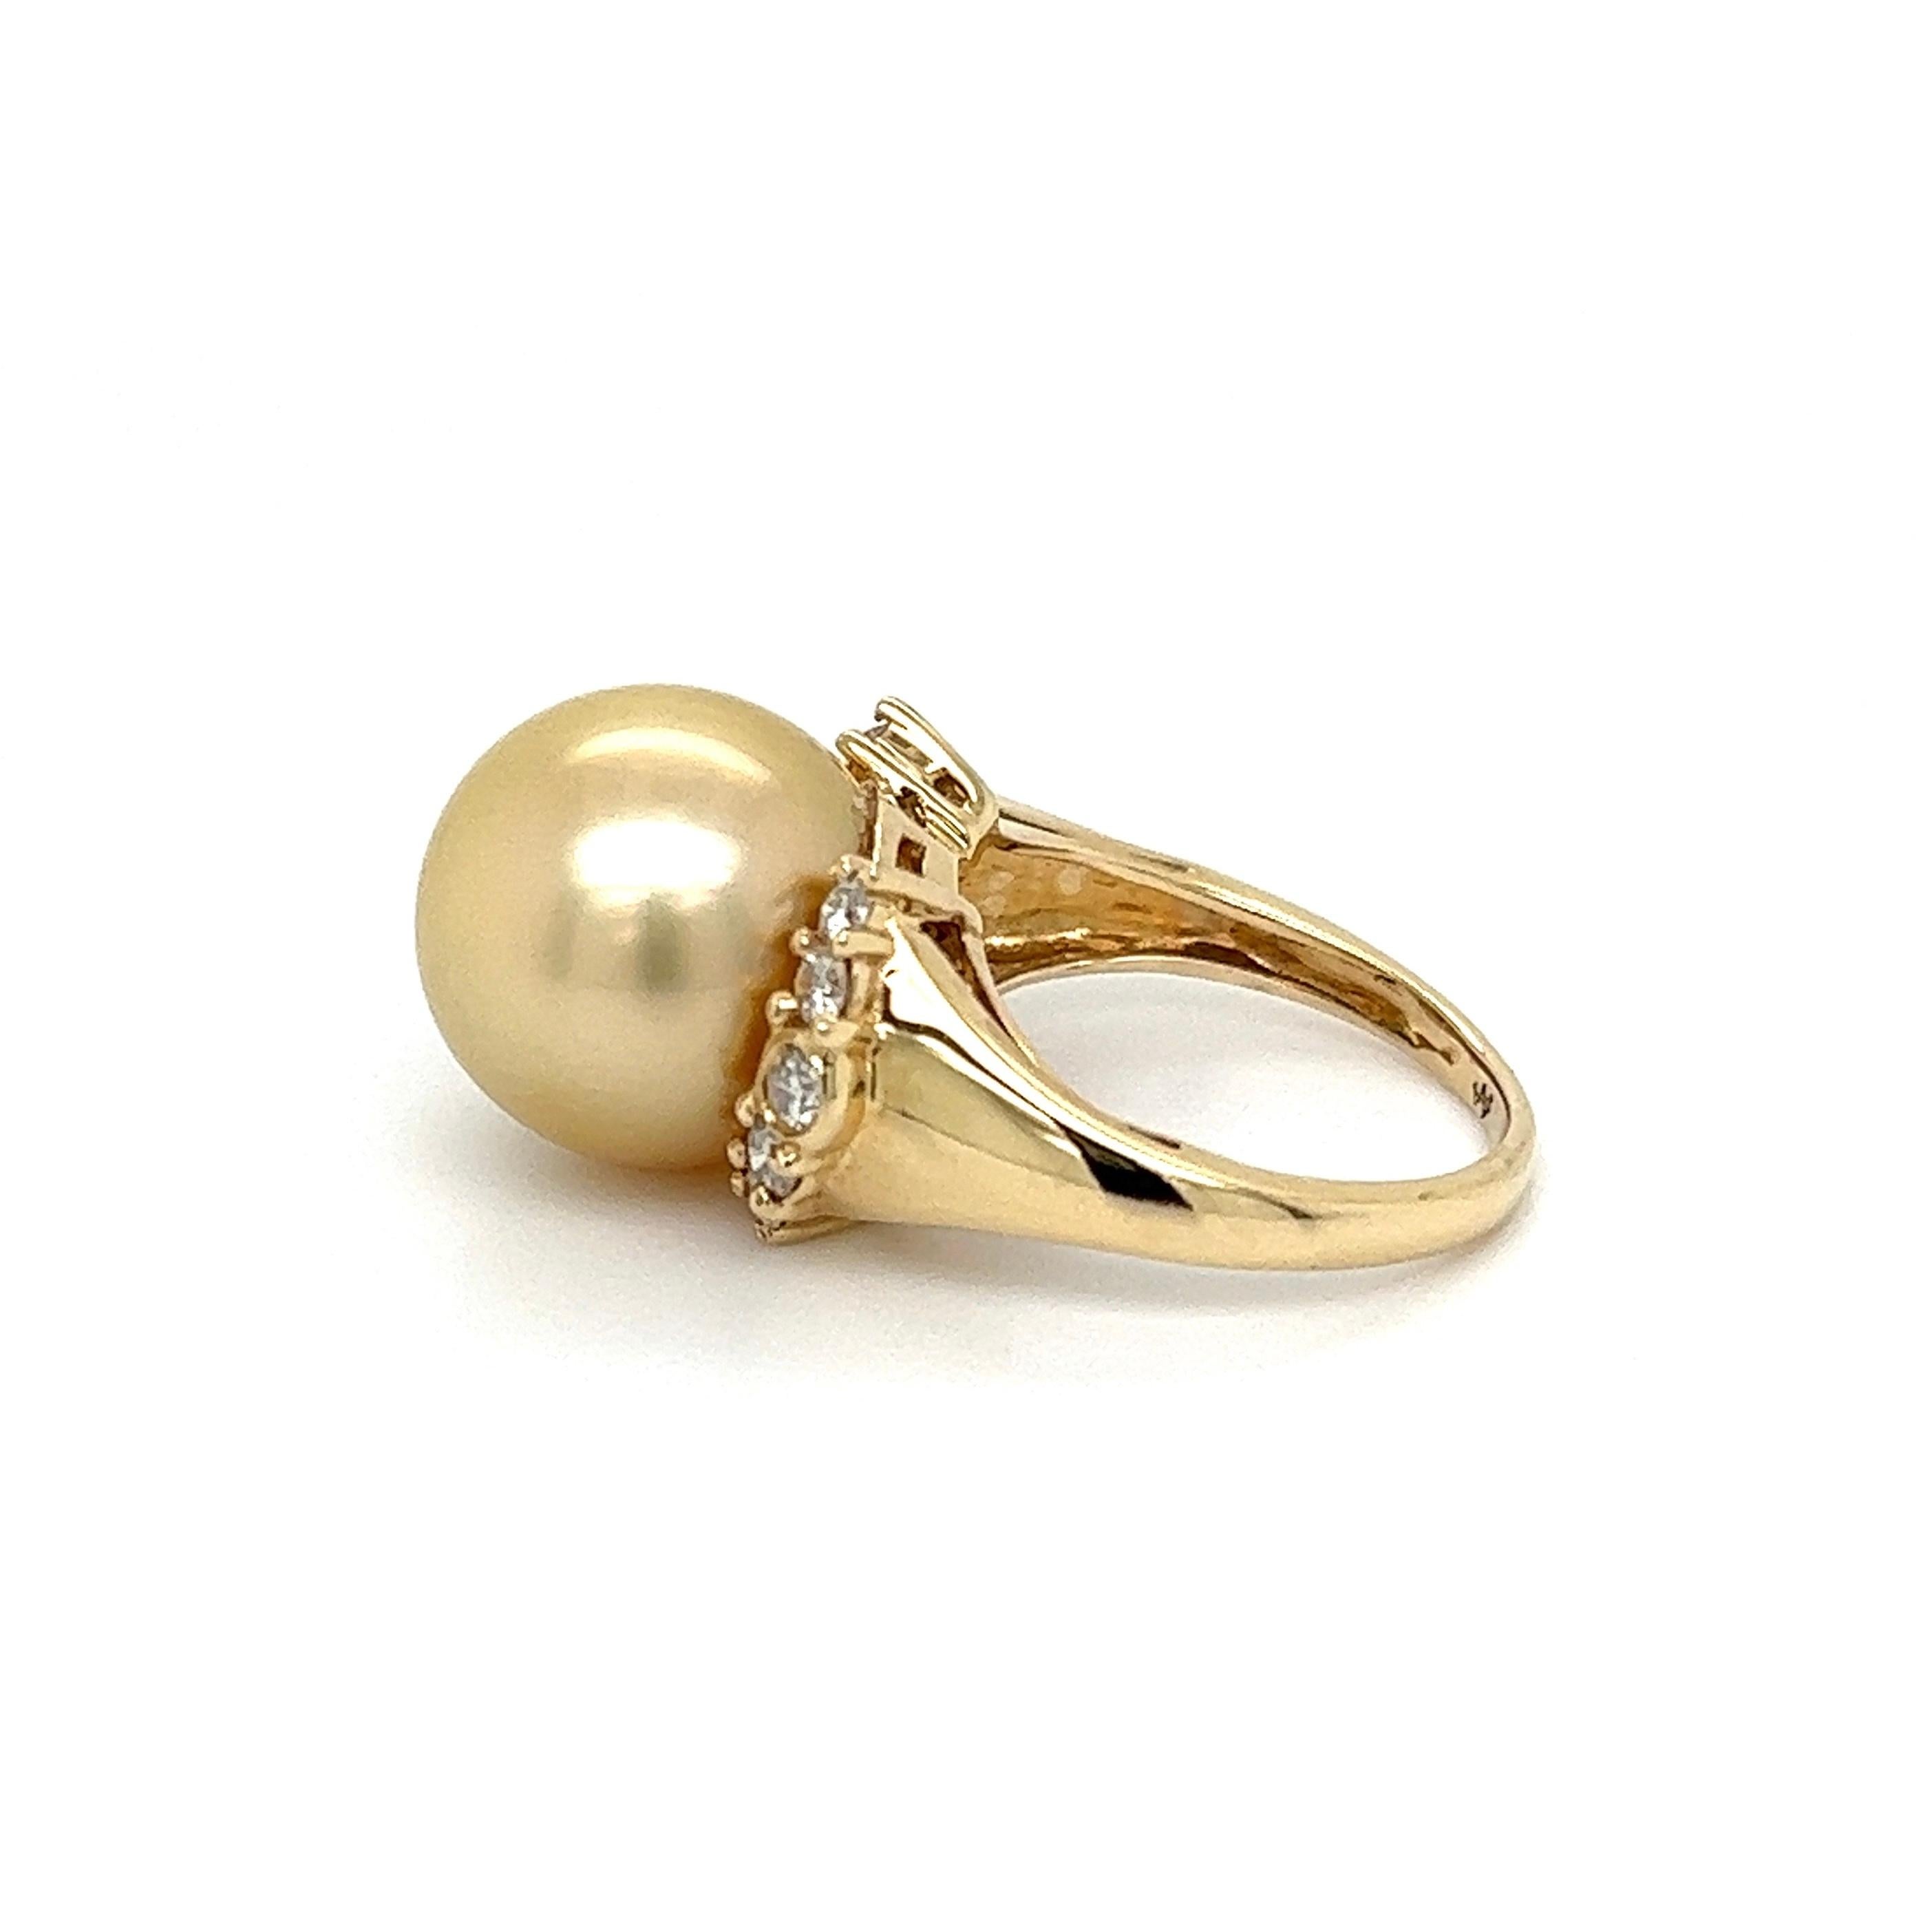 Women's 12.5mm Golden South Sea Pearl and Diamond Gold Cocktail Ring